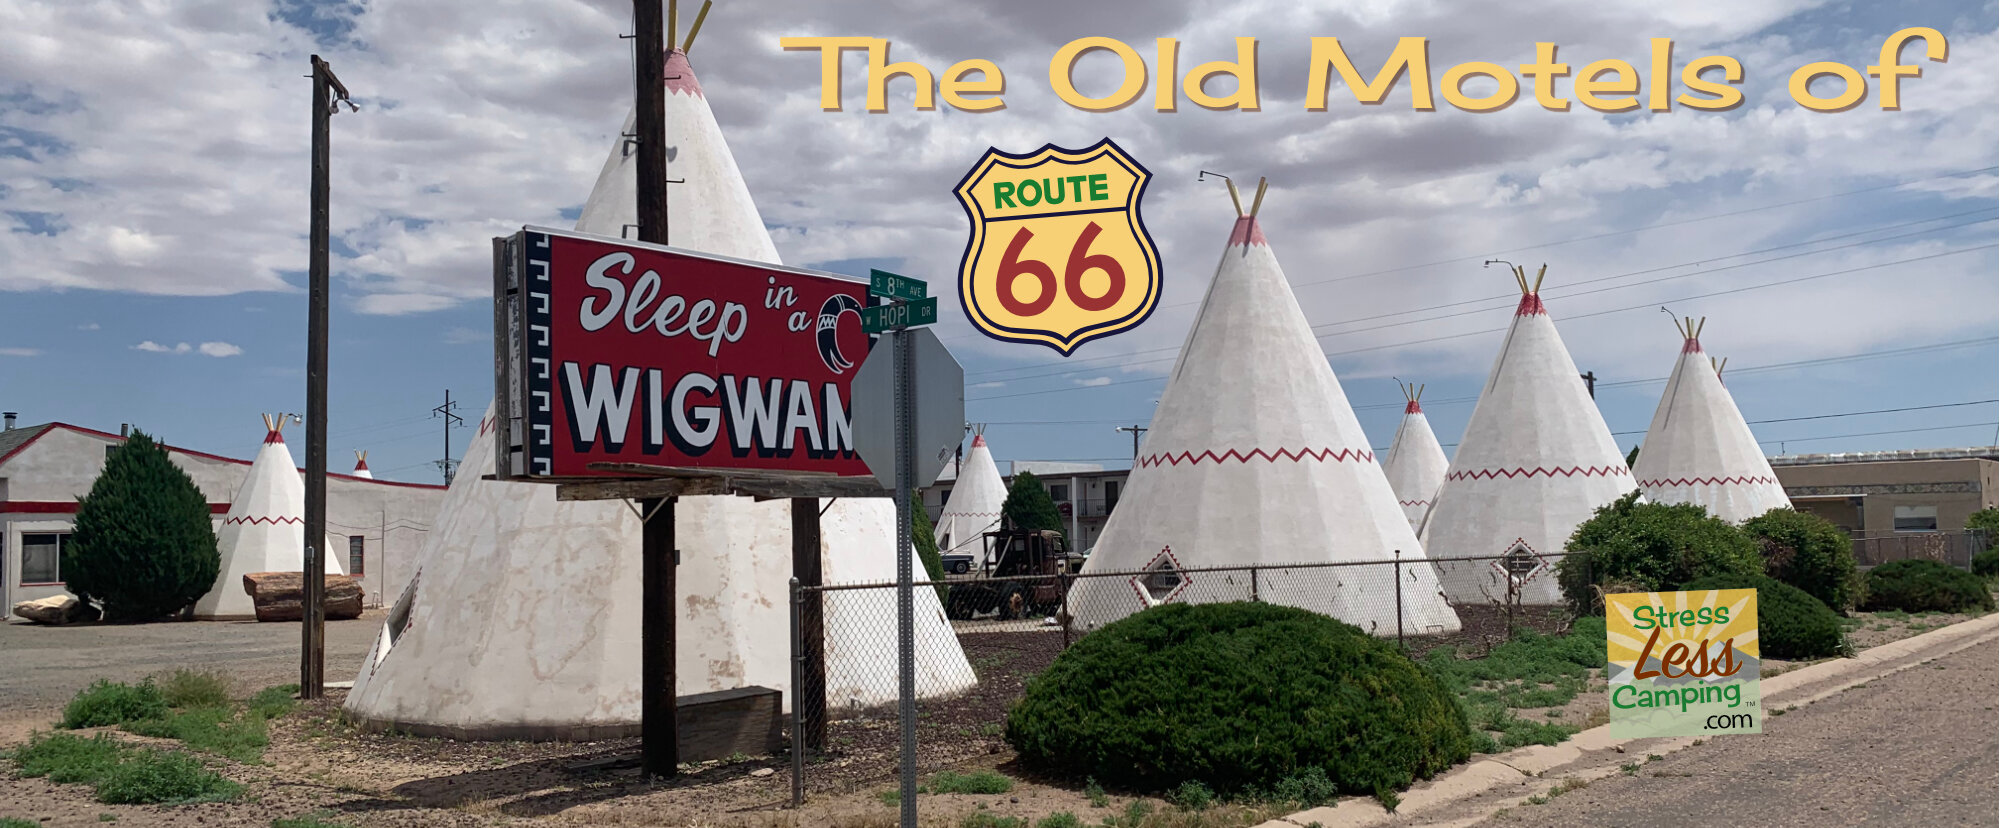 Motels of Route 66 SS